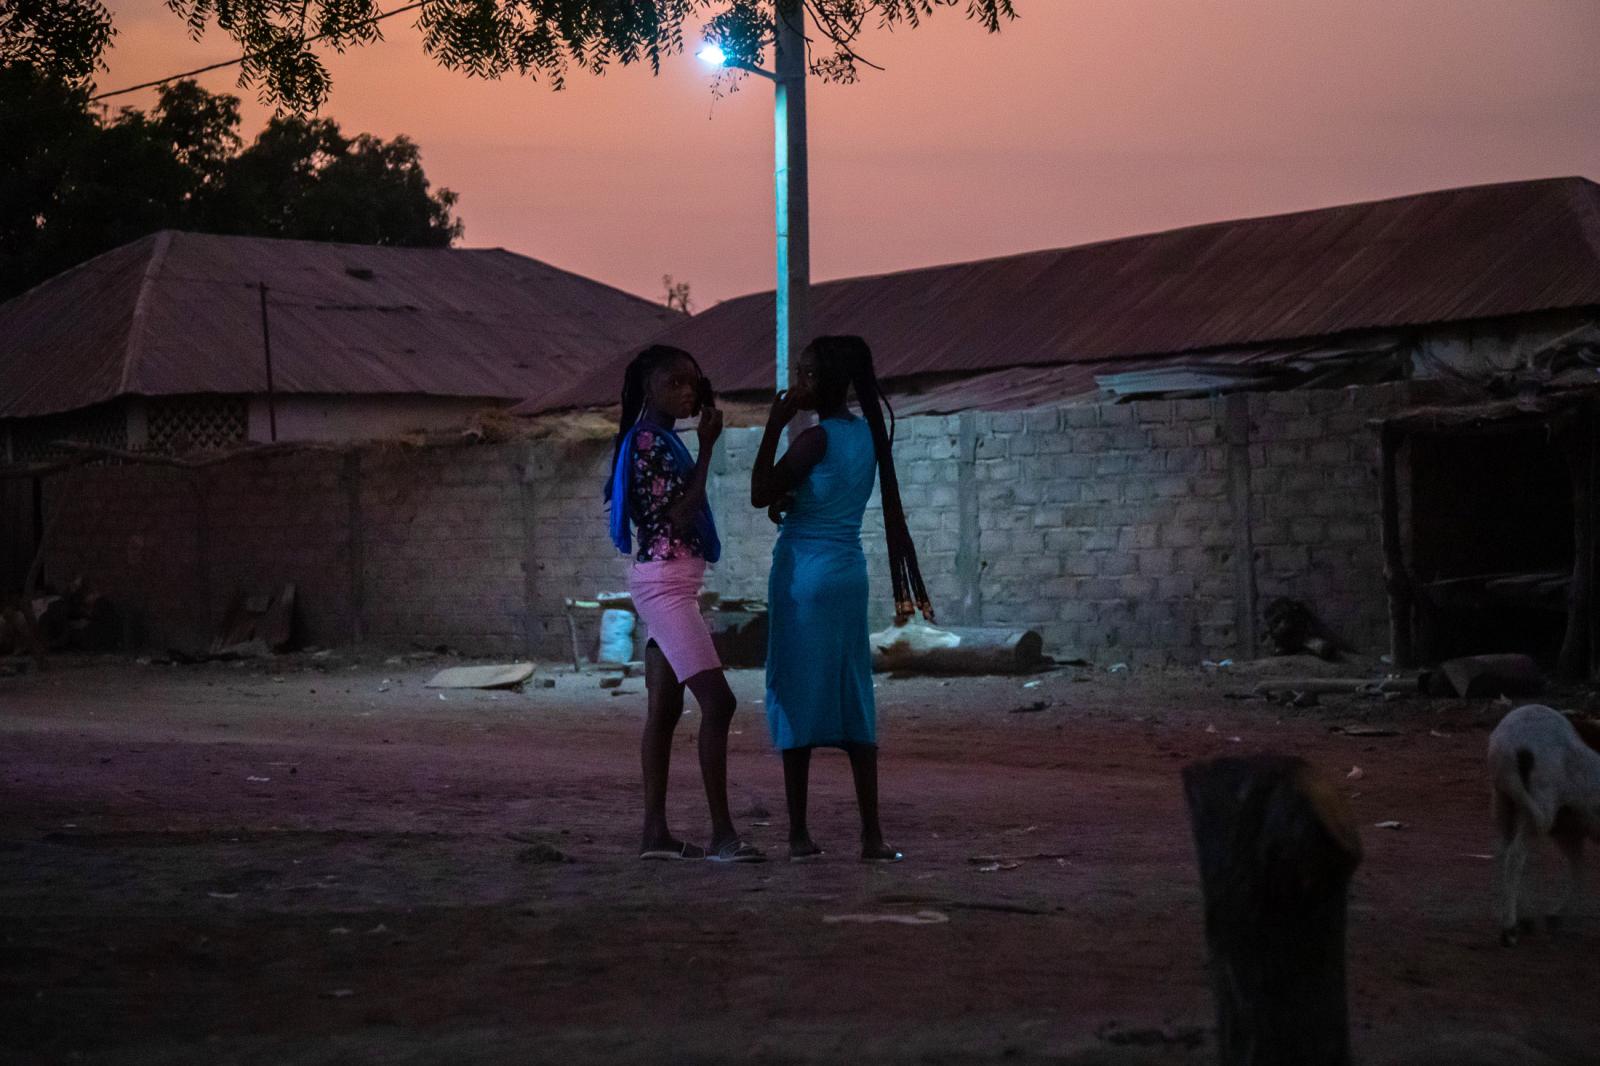 Women meet at nightfall in the ... village Nymanarr in The Gambia